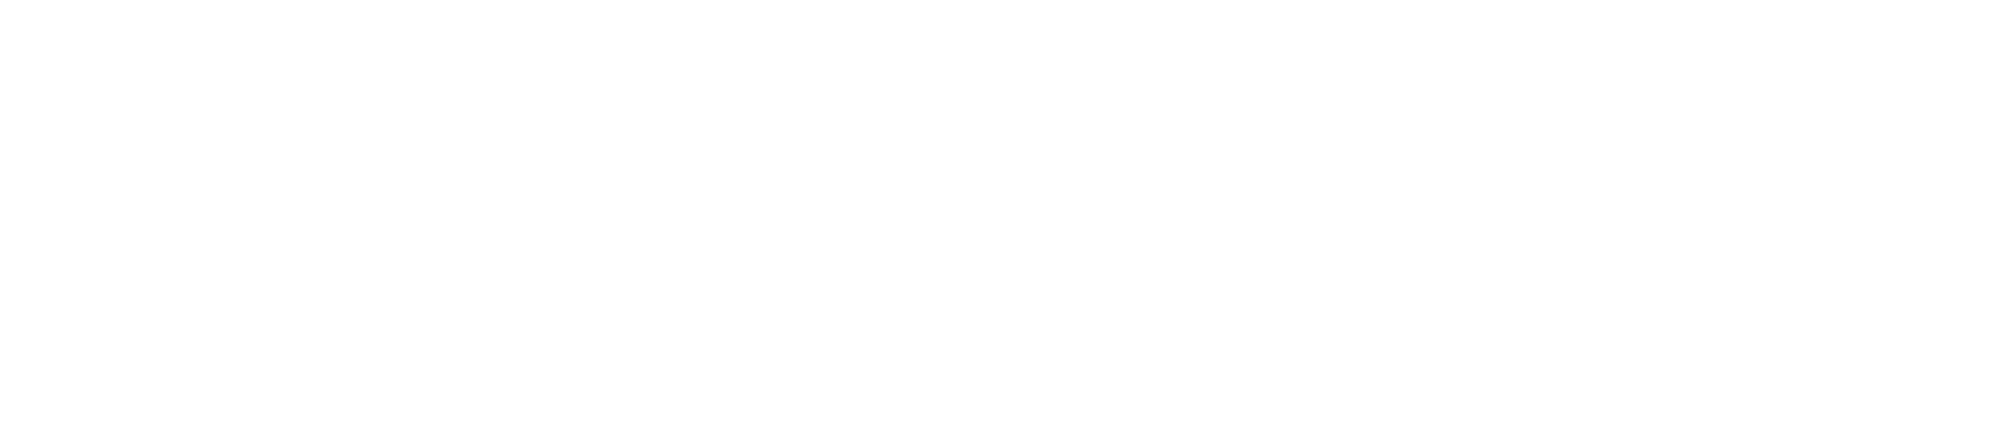 Solid State Studios